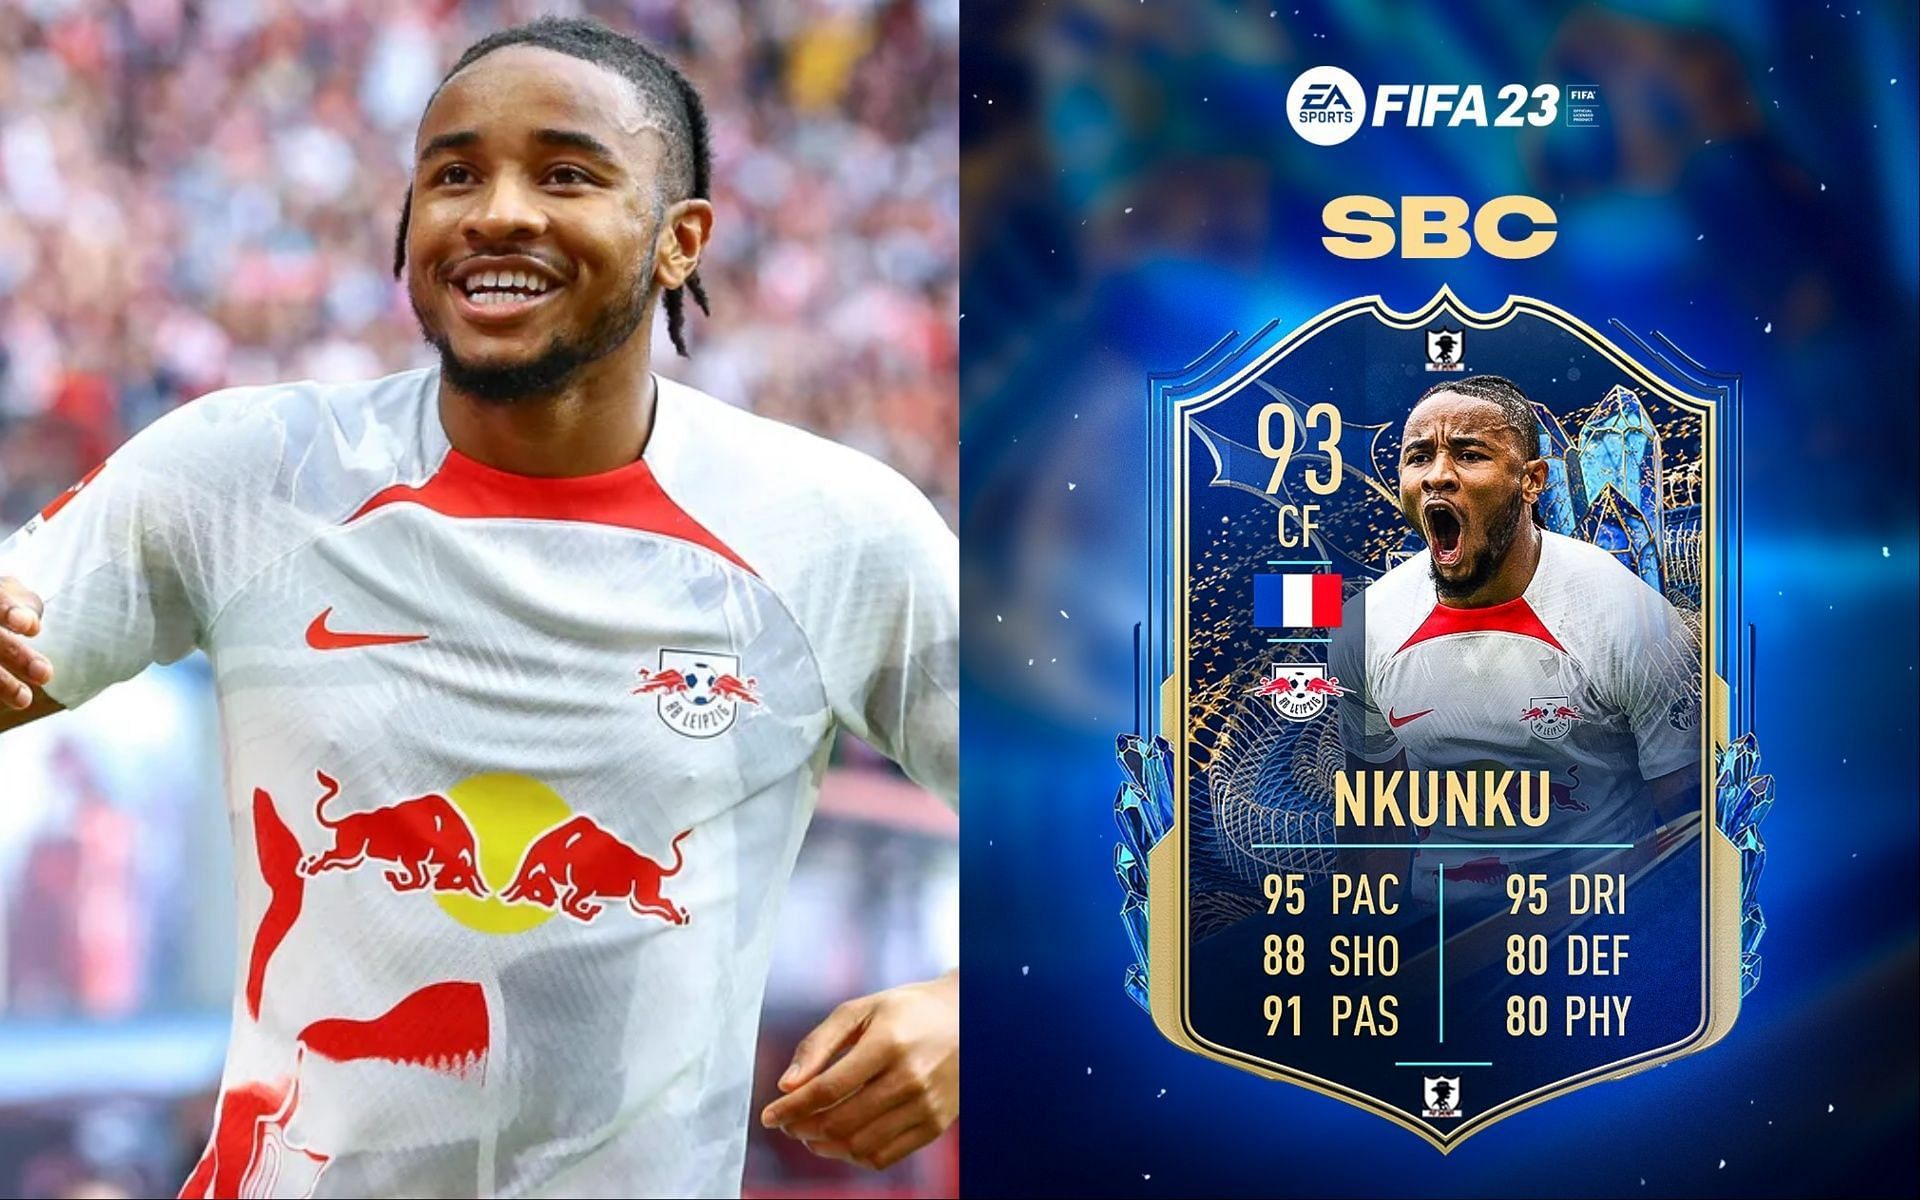 Christopher Nkunku to join through the Bundesliga TOTS Moments in FIFA 23 Ultimate Team (Image via Getty, Twitter/FUT Sheriff)